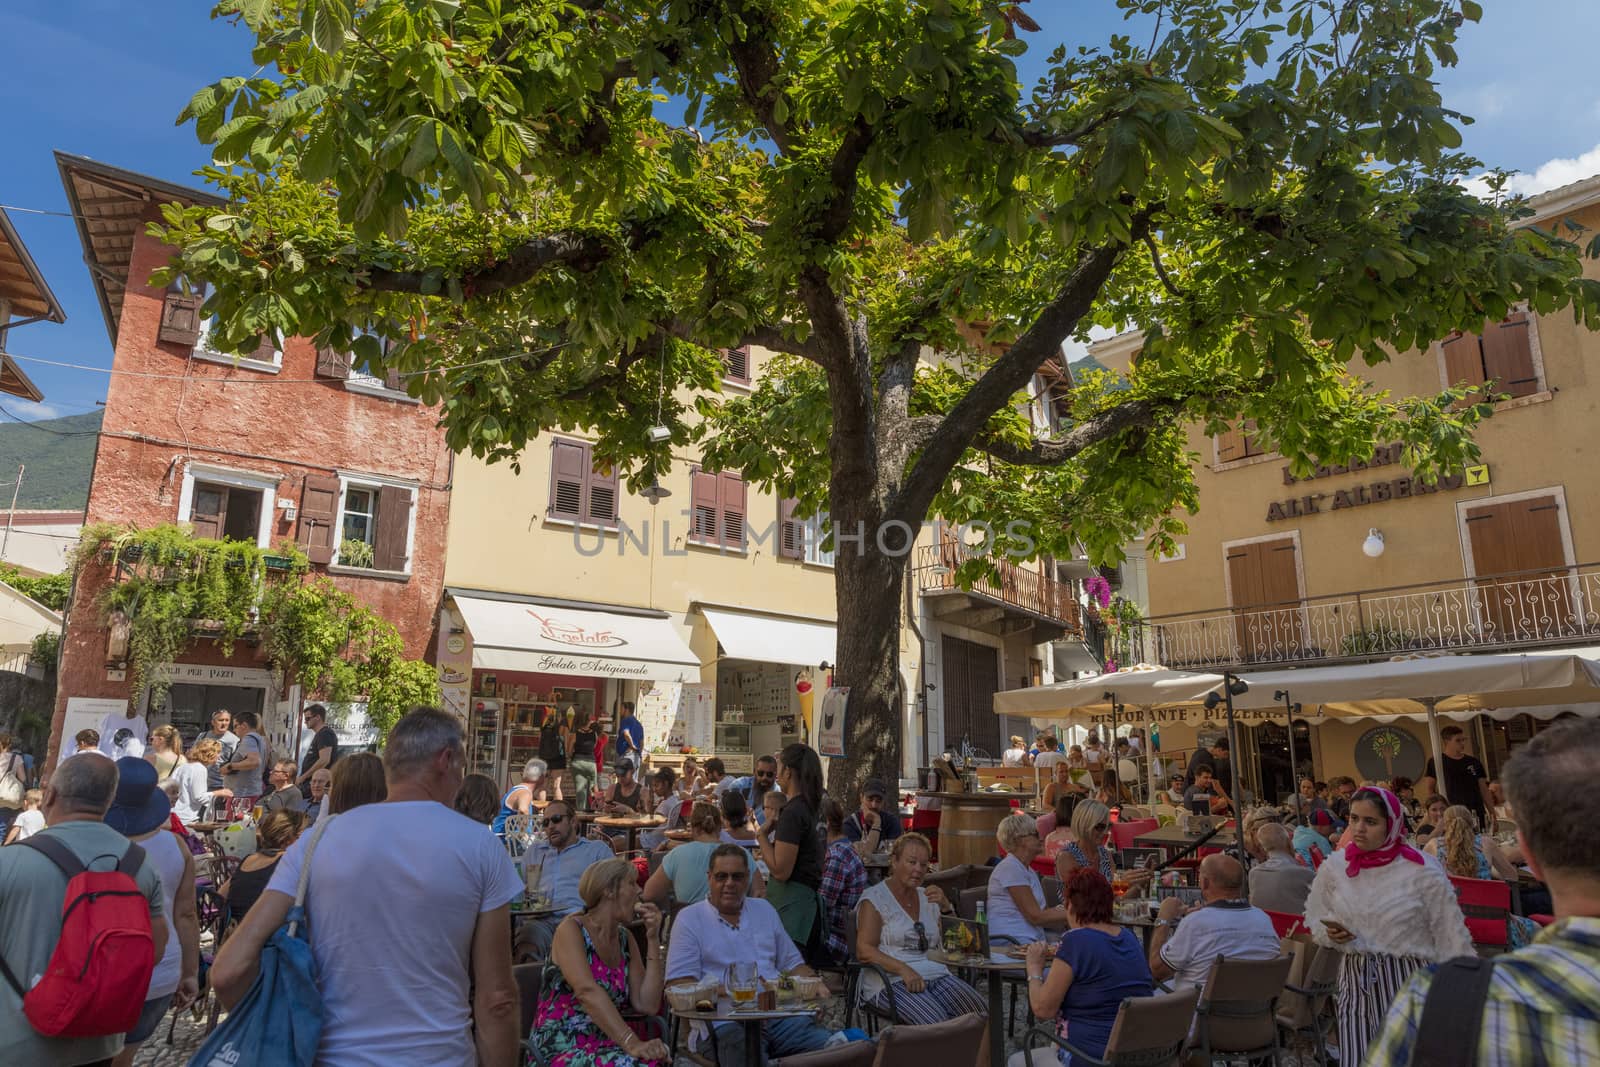 Malcesine, Lake Garda, Italy, August 2019, A view of the small town of Malcesine in the market square